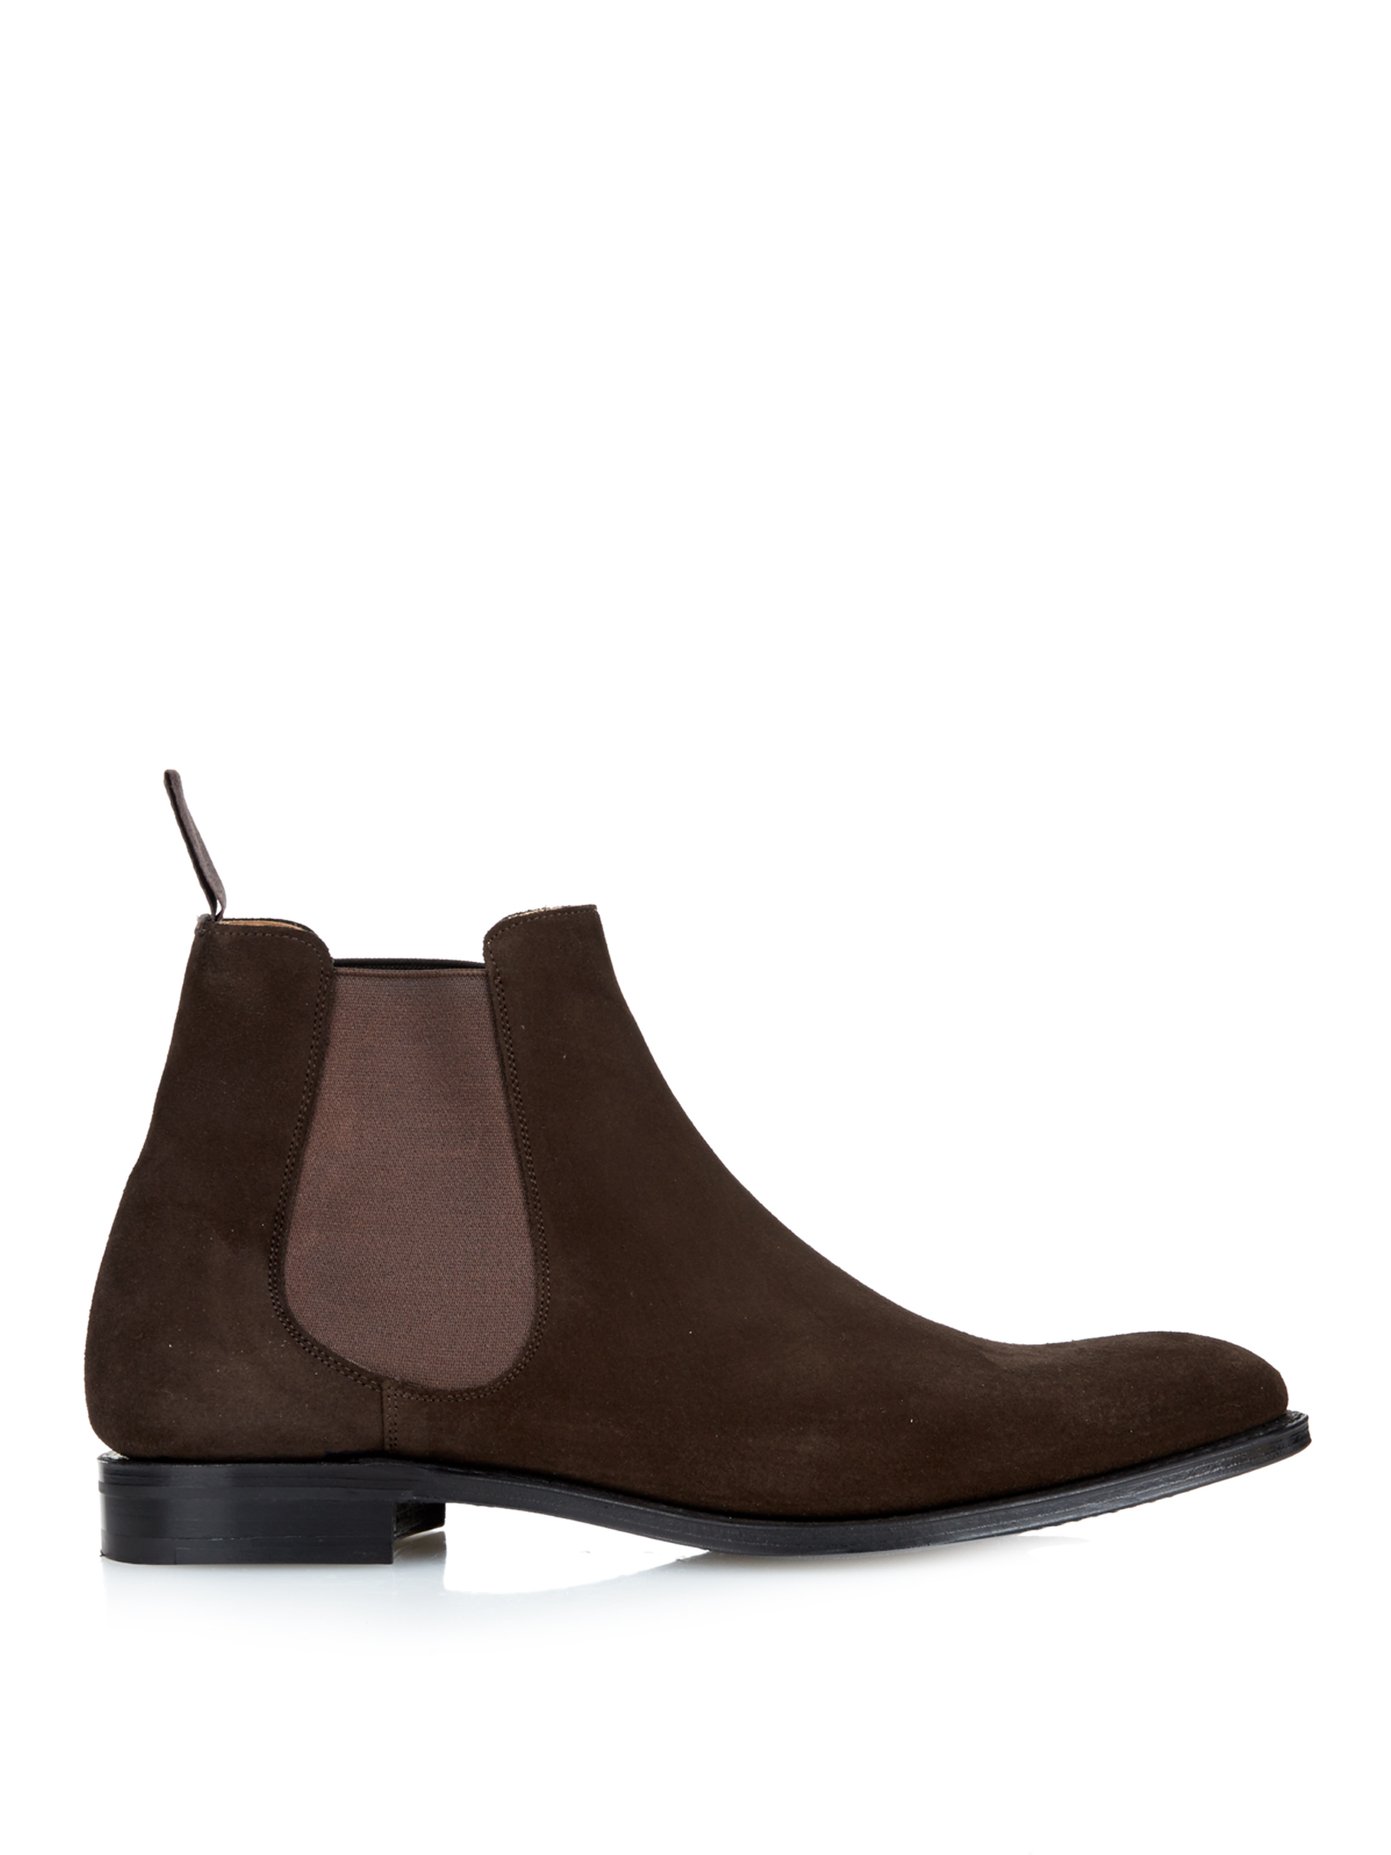 Houston suede chelsea boots | Church's 